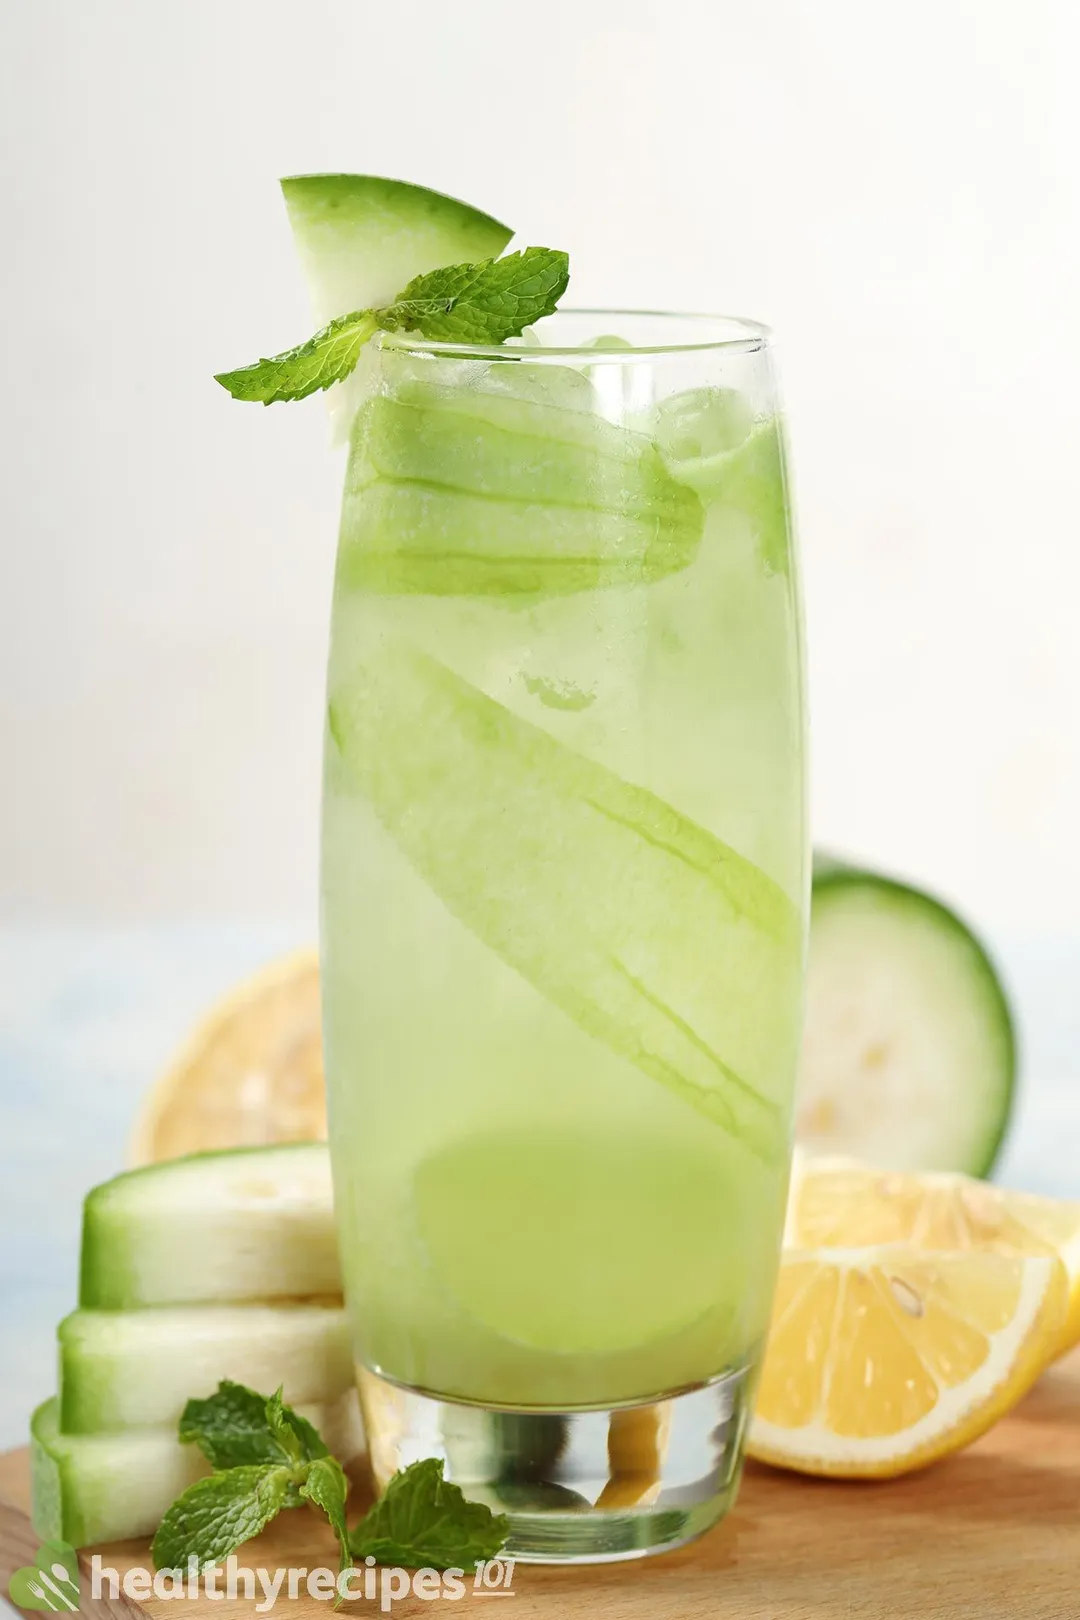 A tall glass of winter melon juice placed on a wooden board near lime wedges and winter melon slices.